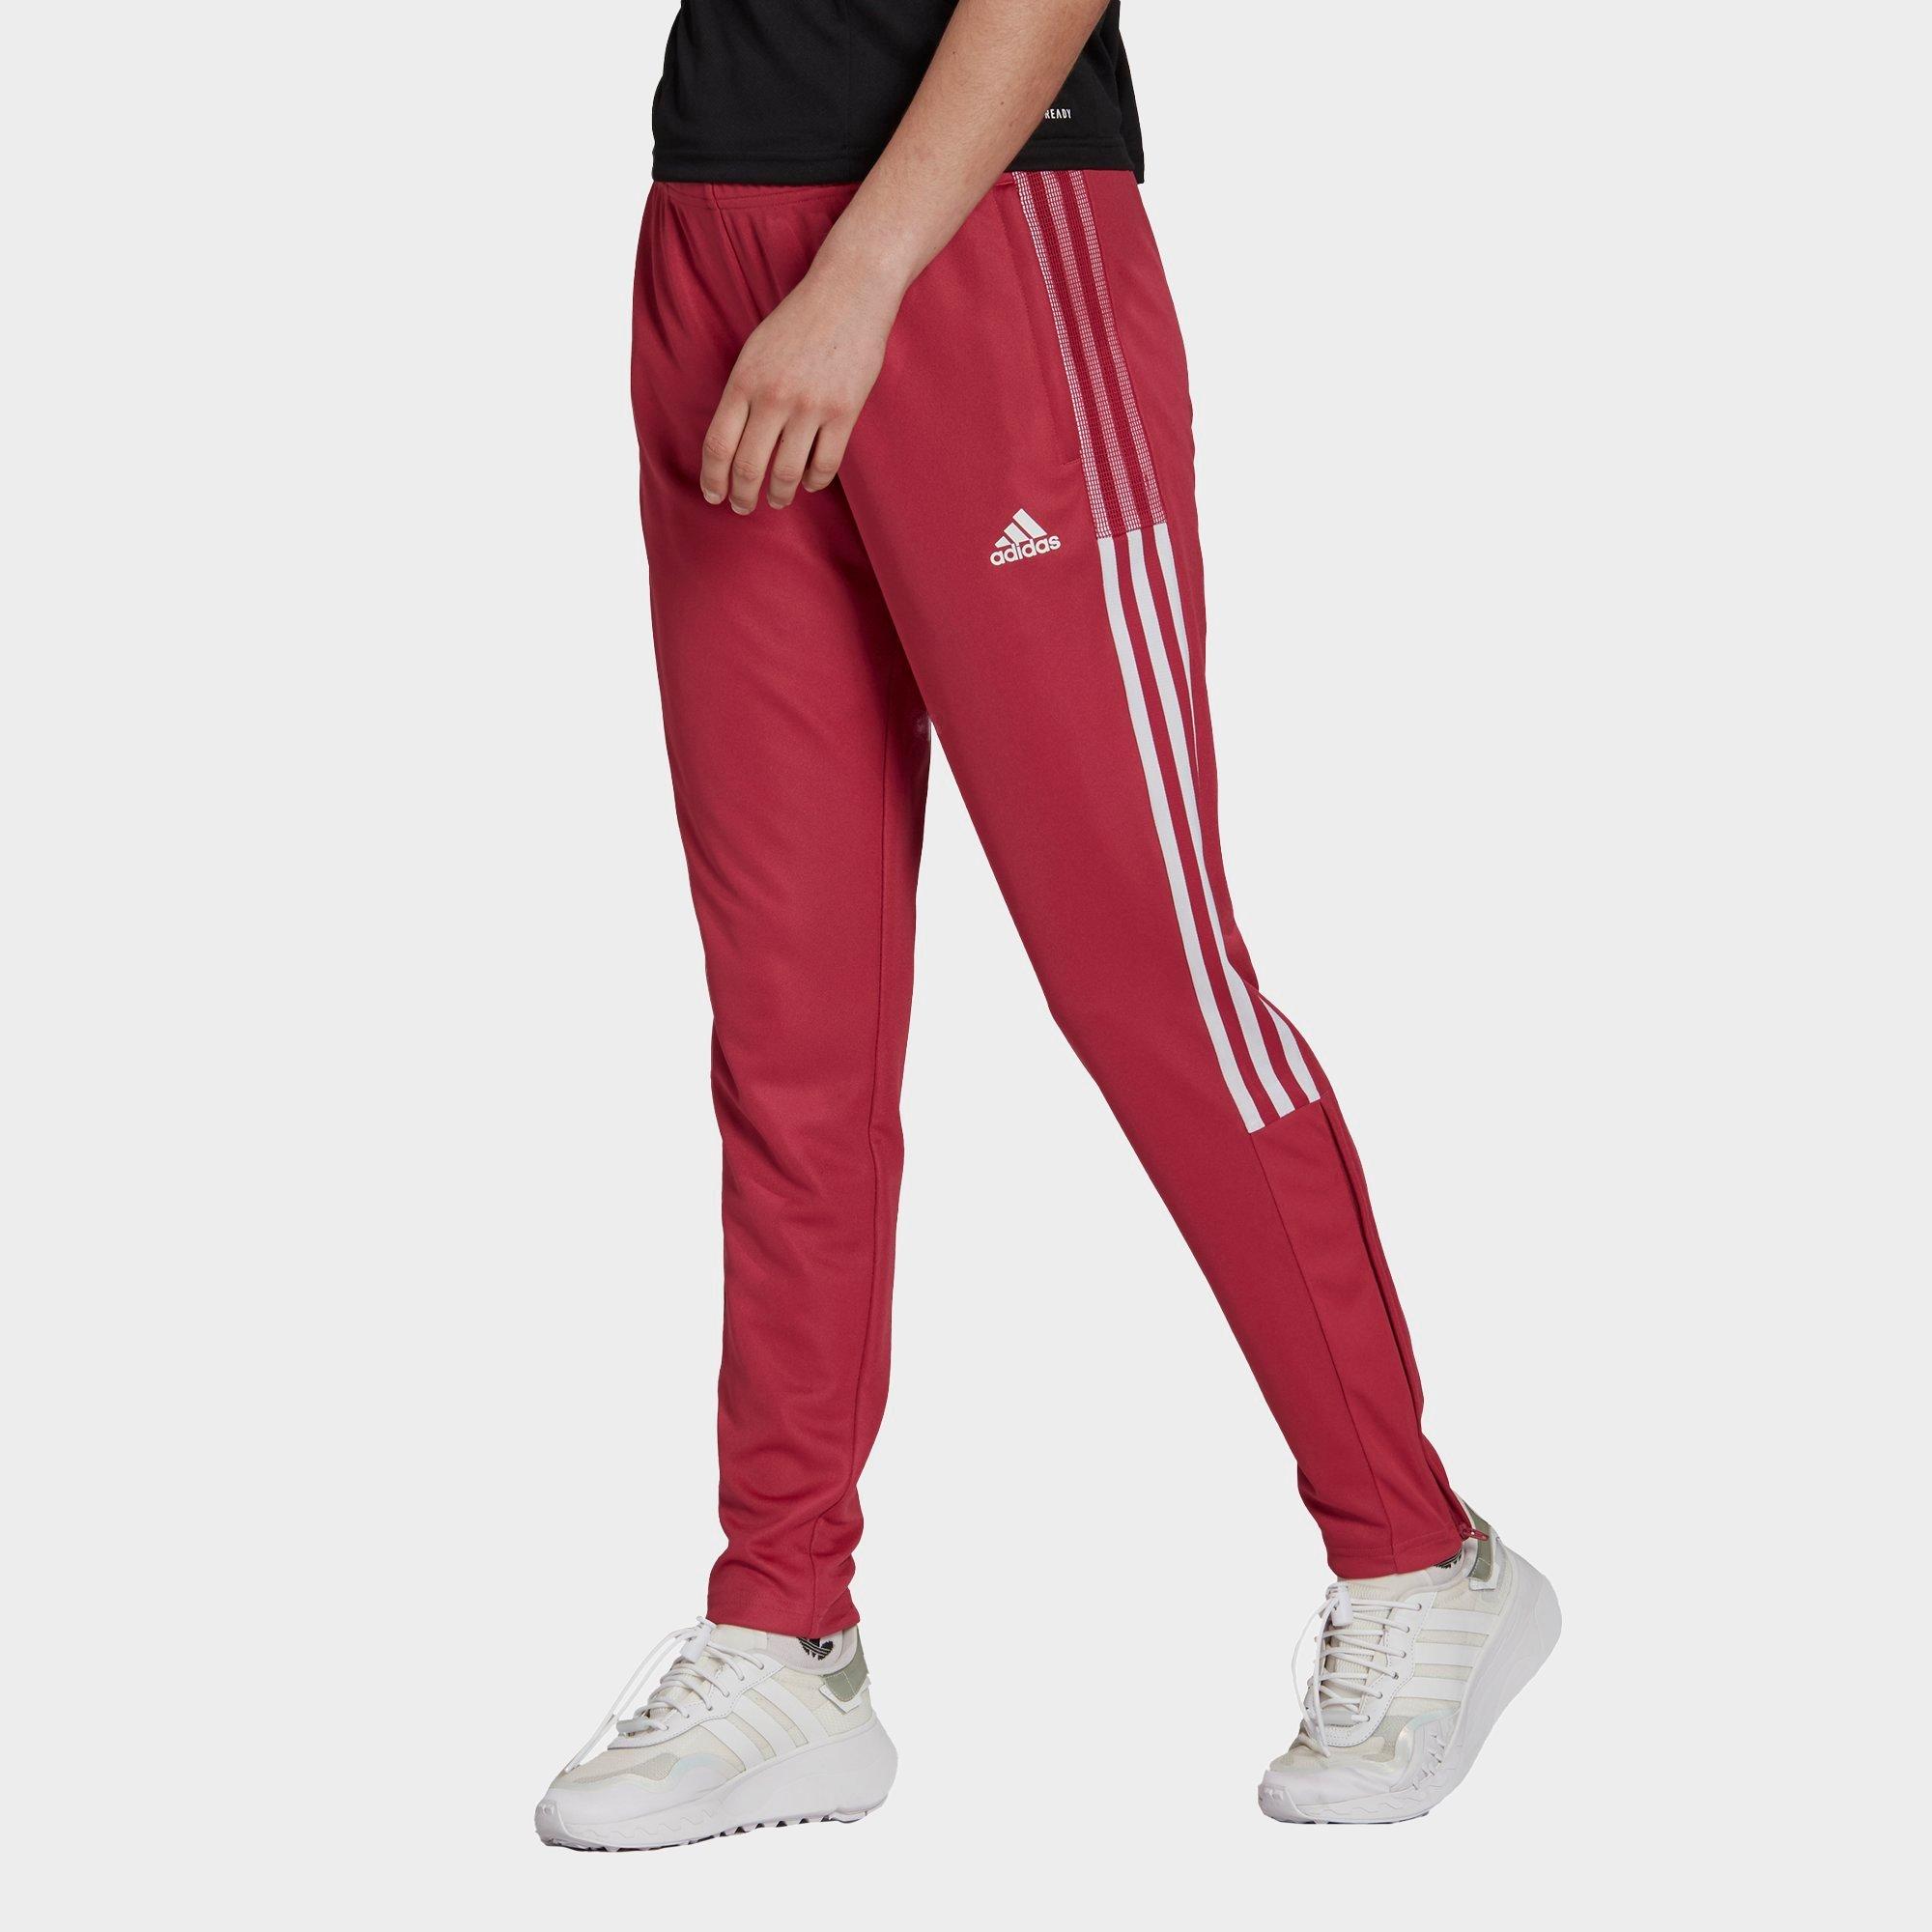 UPC 194811000219 product image for Adidas Women's Tiro 21 Track Pants in Pink/Wild Pink Size Small Polyester/Knit | upcitemdb.com